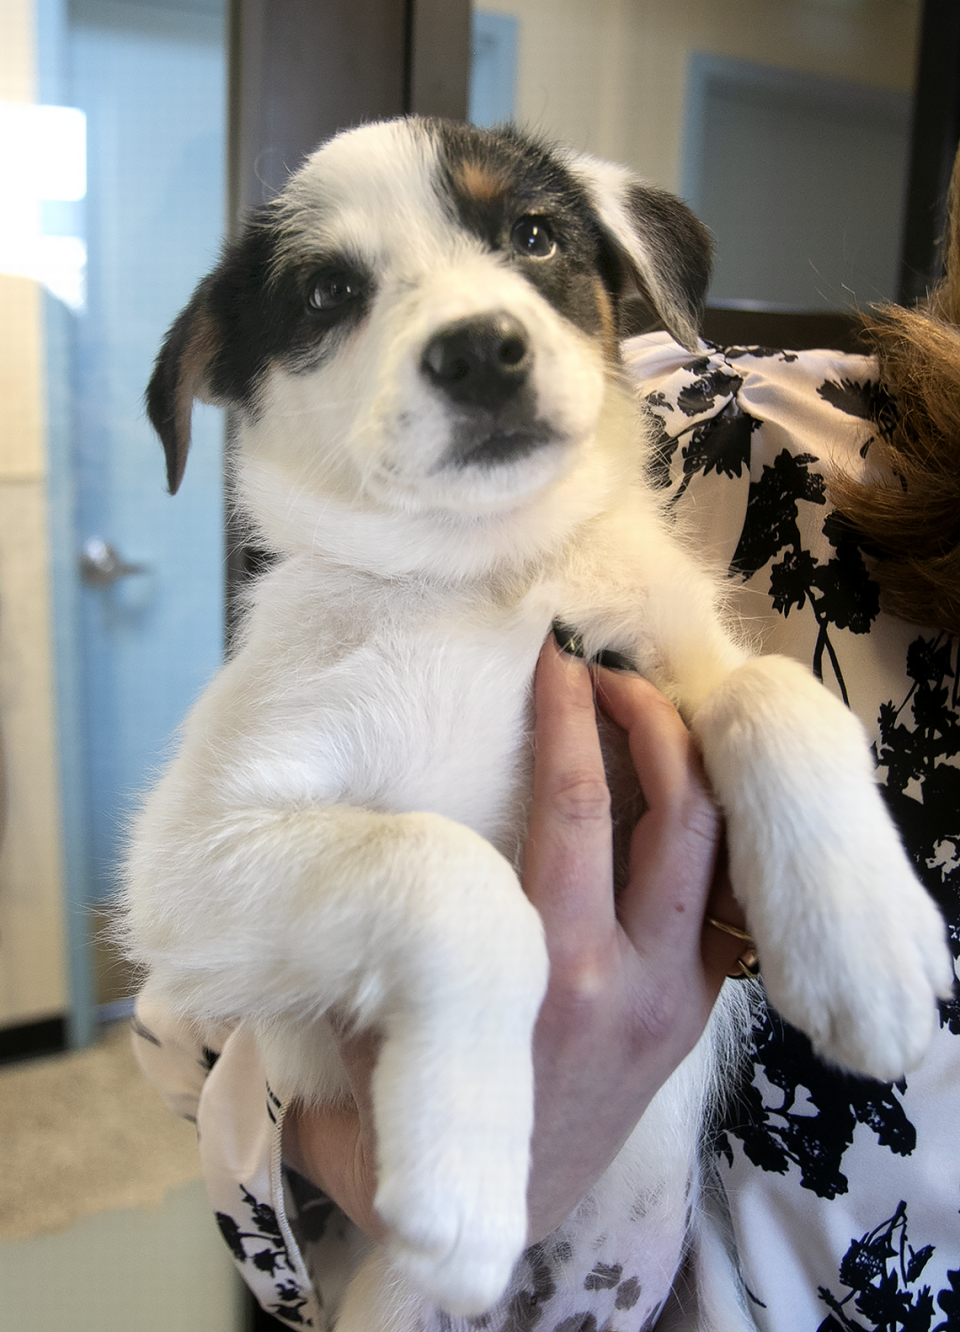 The number of puppies at Woods Humane Society in San Luis Obispo and Atascadero has tripled in 2023 as owners surrender unwanted dogs. Woods CEO Emily L’Heureux holds one of four belonging to a cute “mutt” named Gracie.